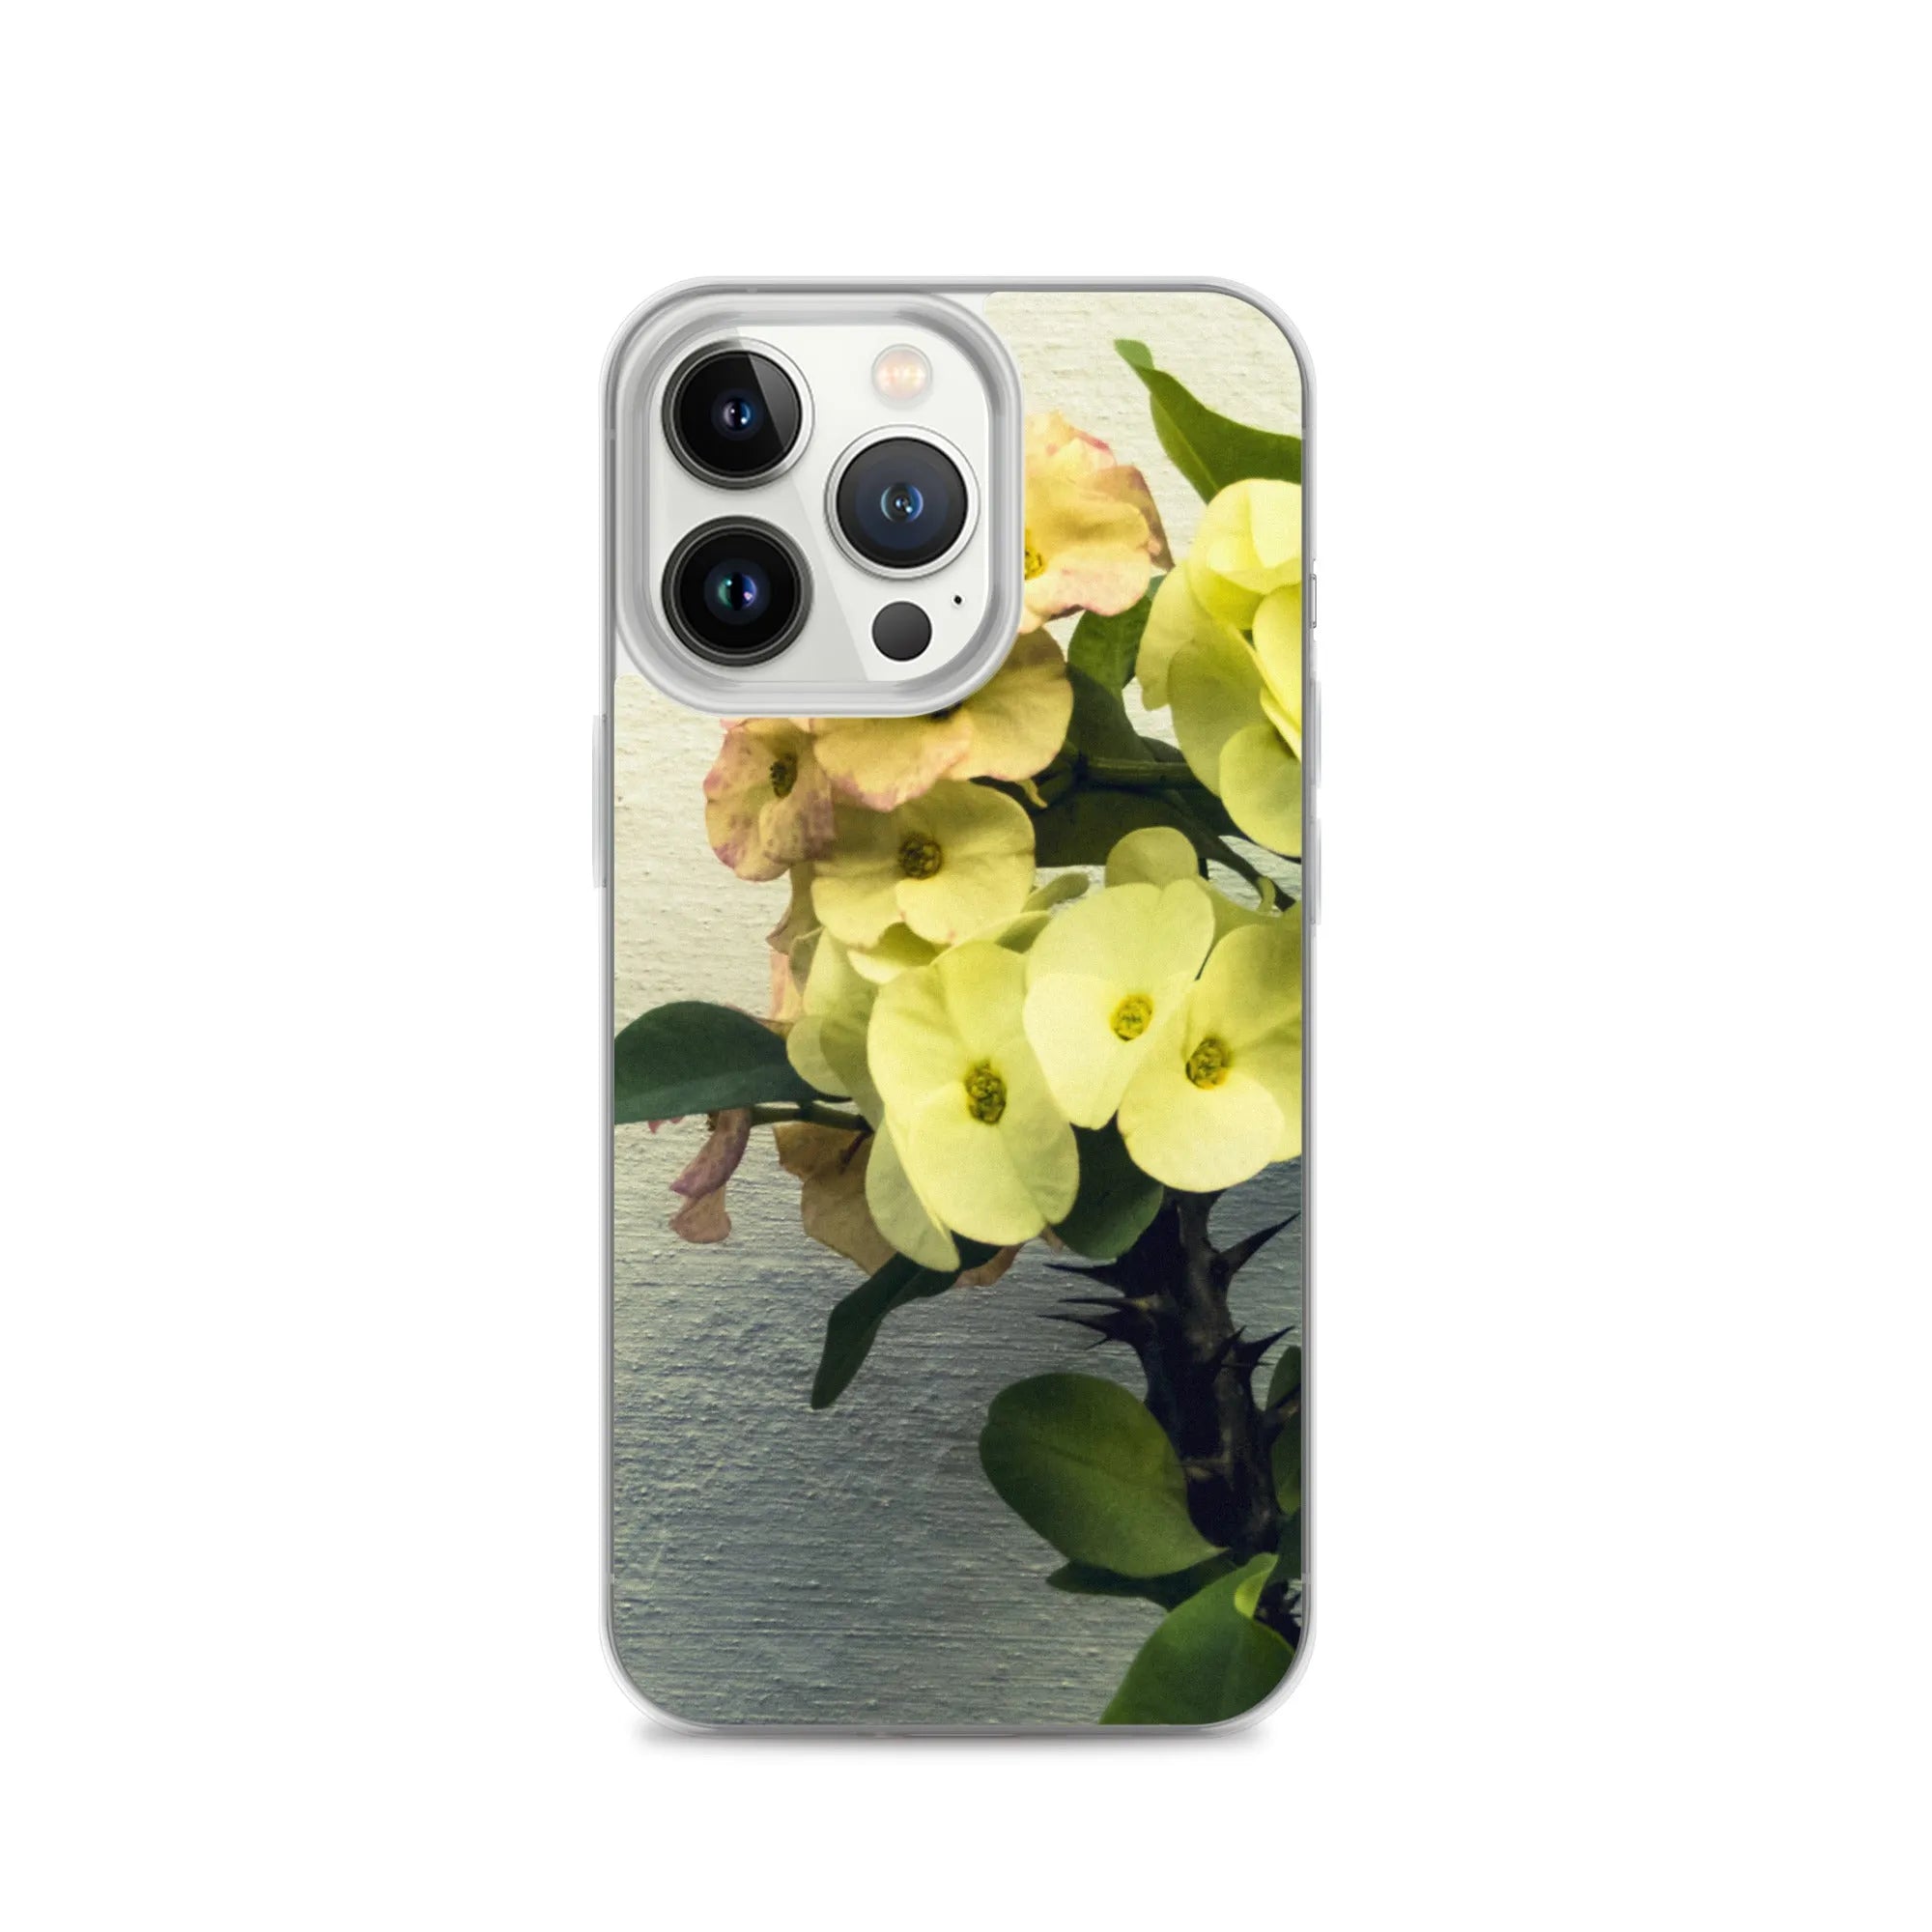 Wallflower Floral Iphone Case - Iphone 13 Pro - Mobile Phone Cases - Aesthetic Art